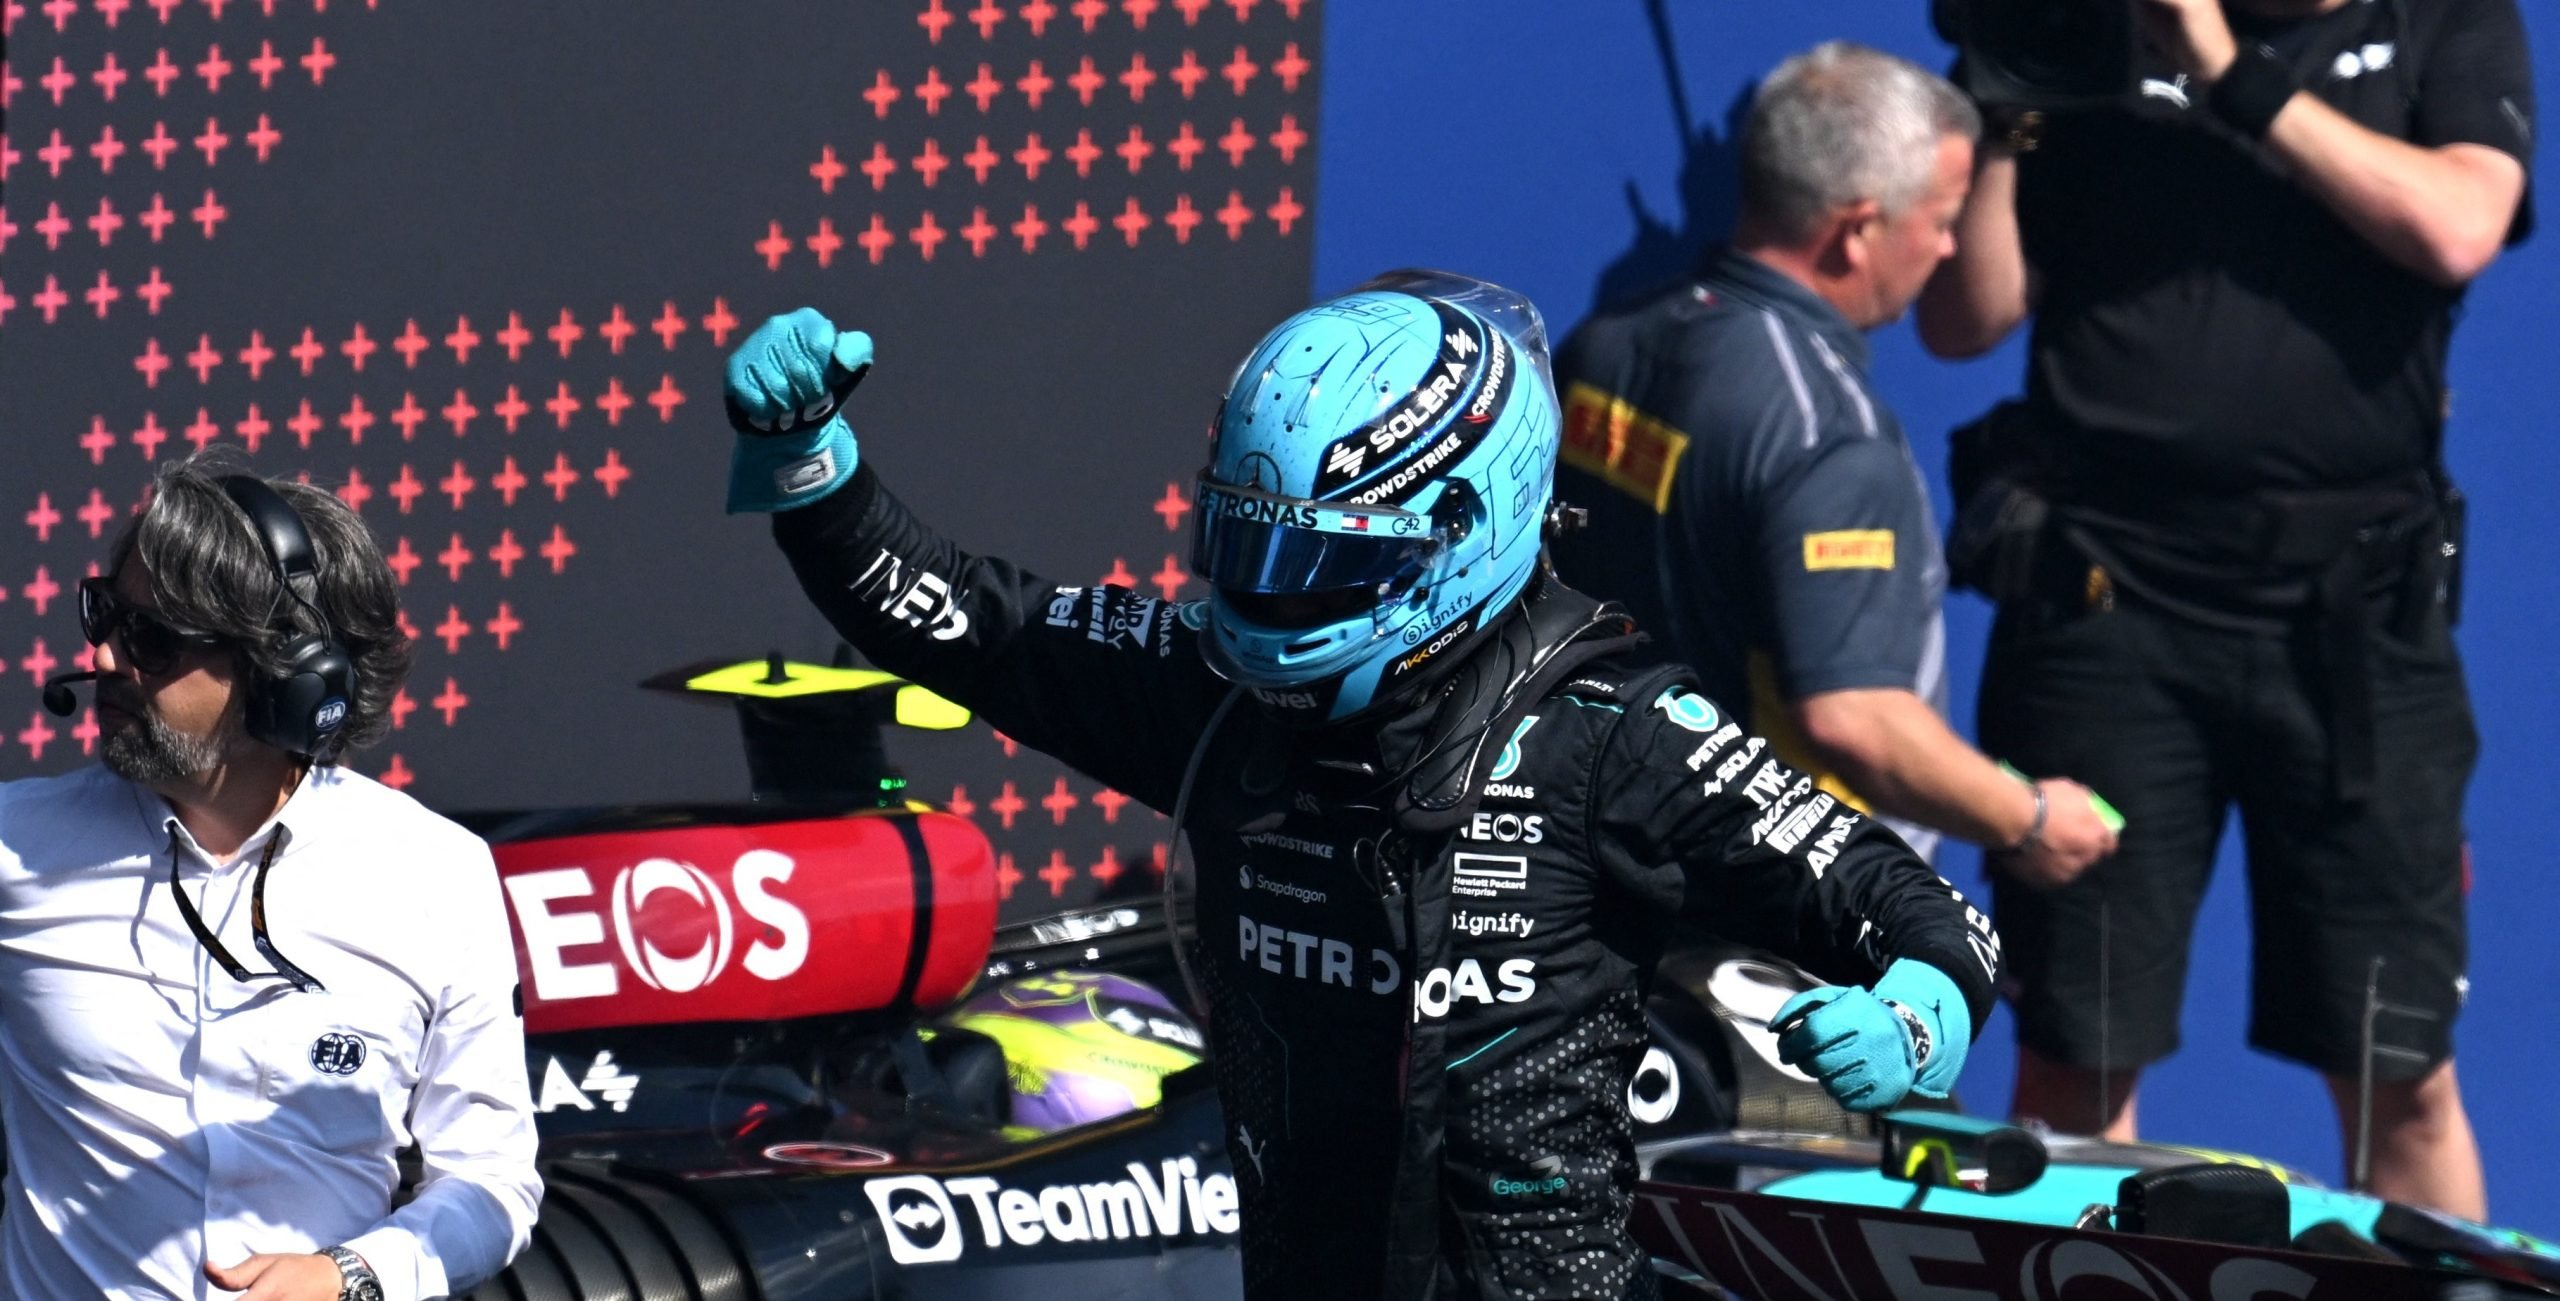 Russell triumphs at the Belgium GP, Mercedes with 1-2 at Spa 7